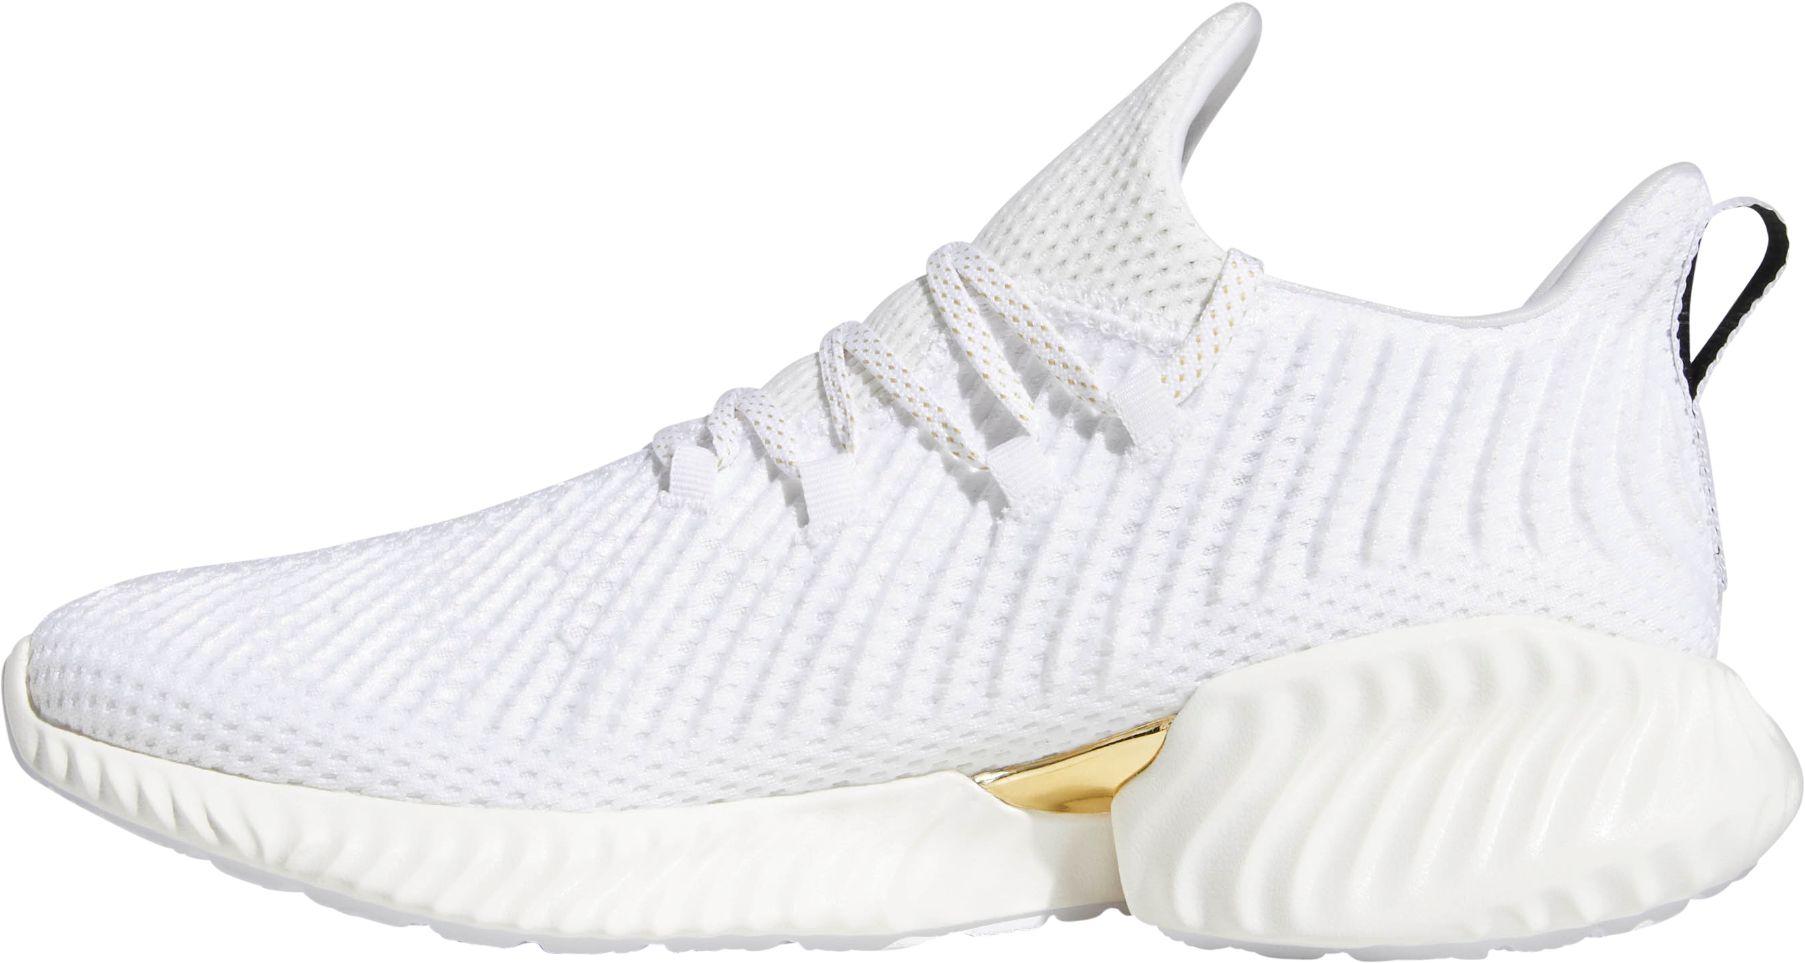 Adidas Alphabounce Instinct White And Gold Outlet Online, UP TO 66 ...